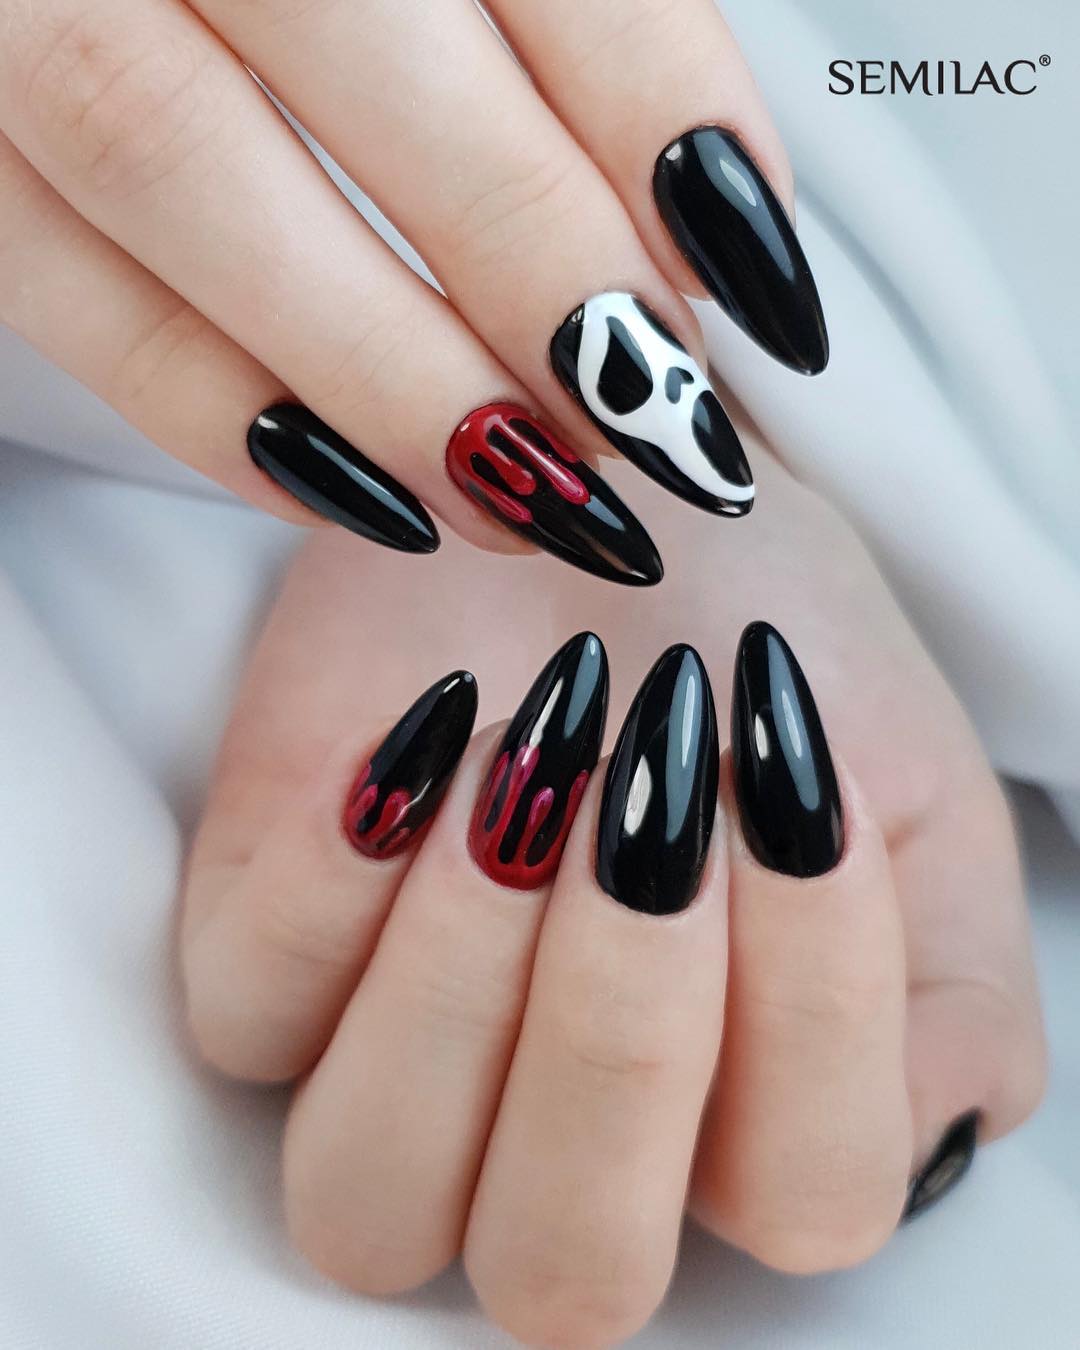 Get Spooky with Halloween Acrylic Nails Short!